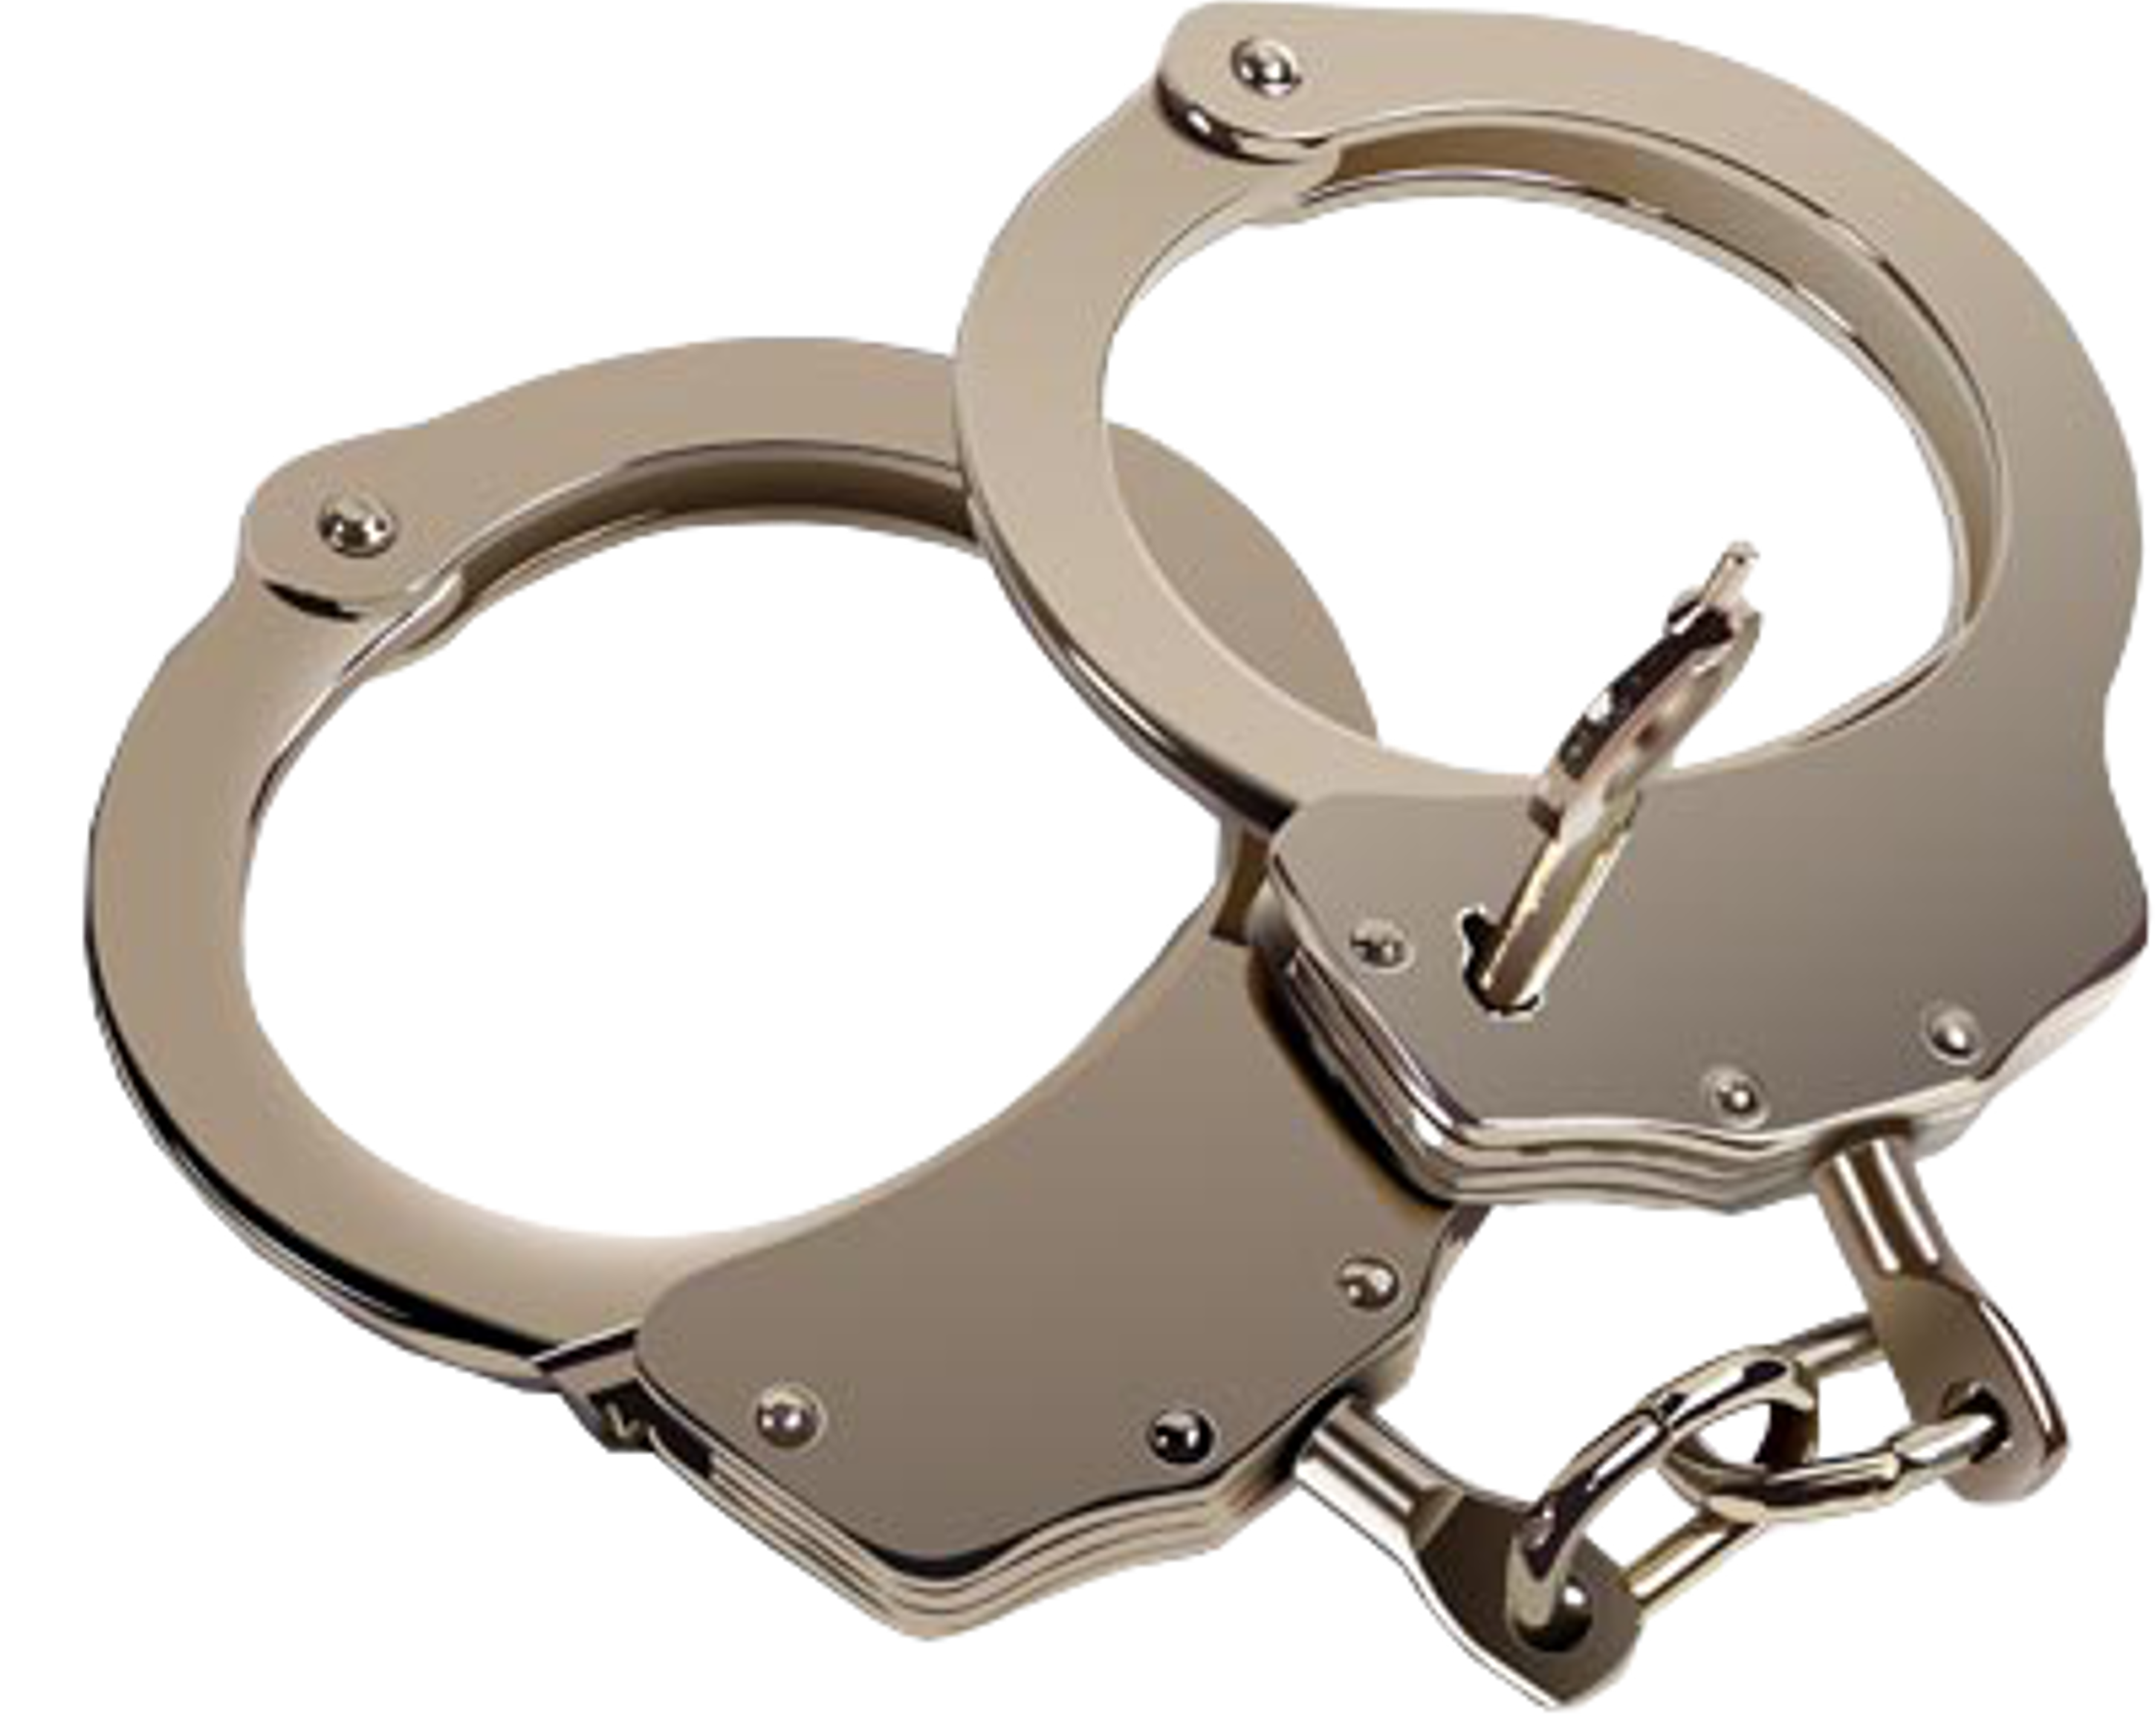 Handcuffs clipart gun. Png images free download